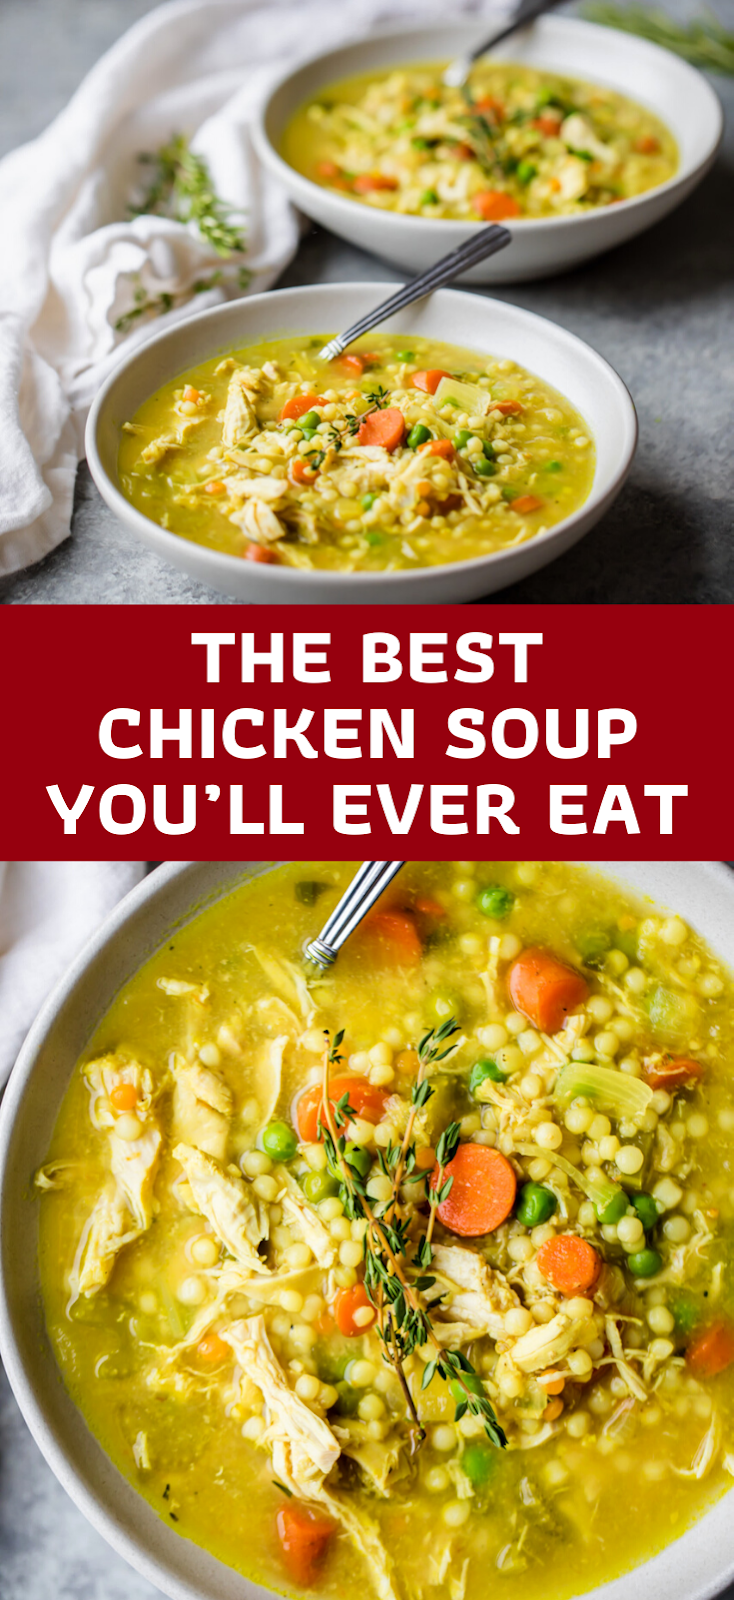 The Best Chicken Soup You’ll Ever Eat